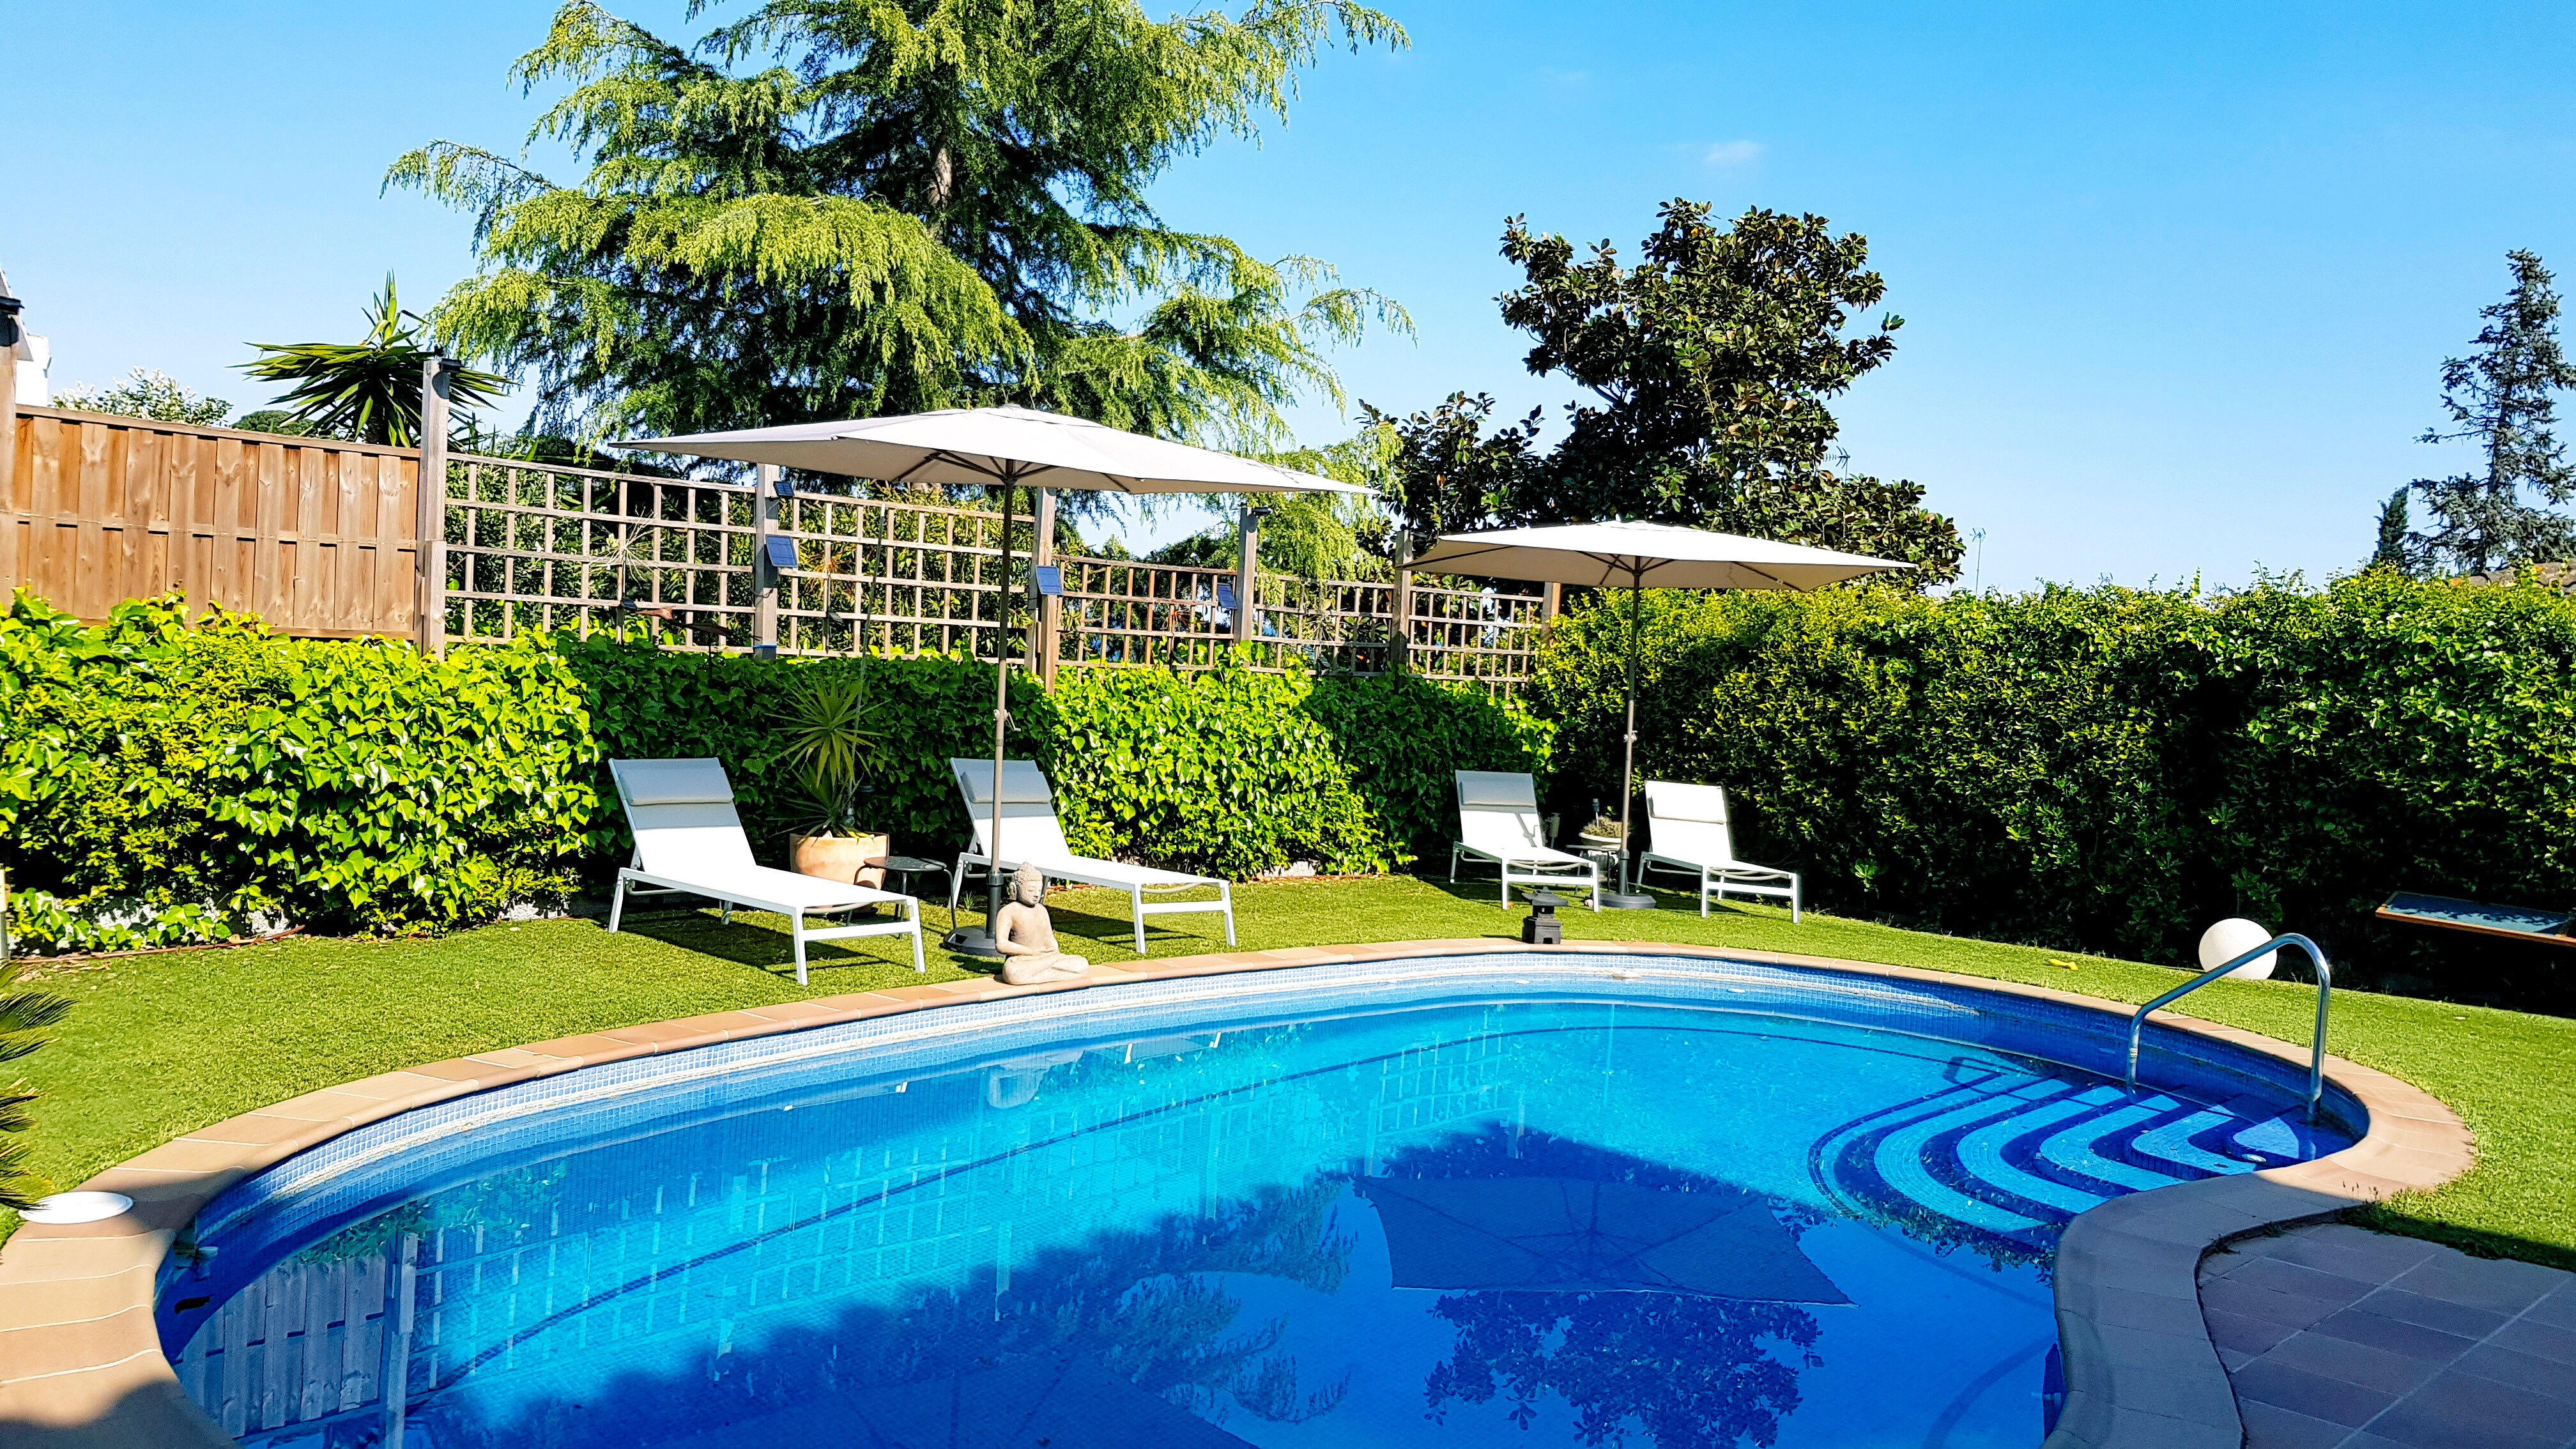 Property Image 1 - Amazing Villa in Arenys de Mar with swimming pool